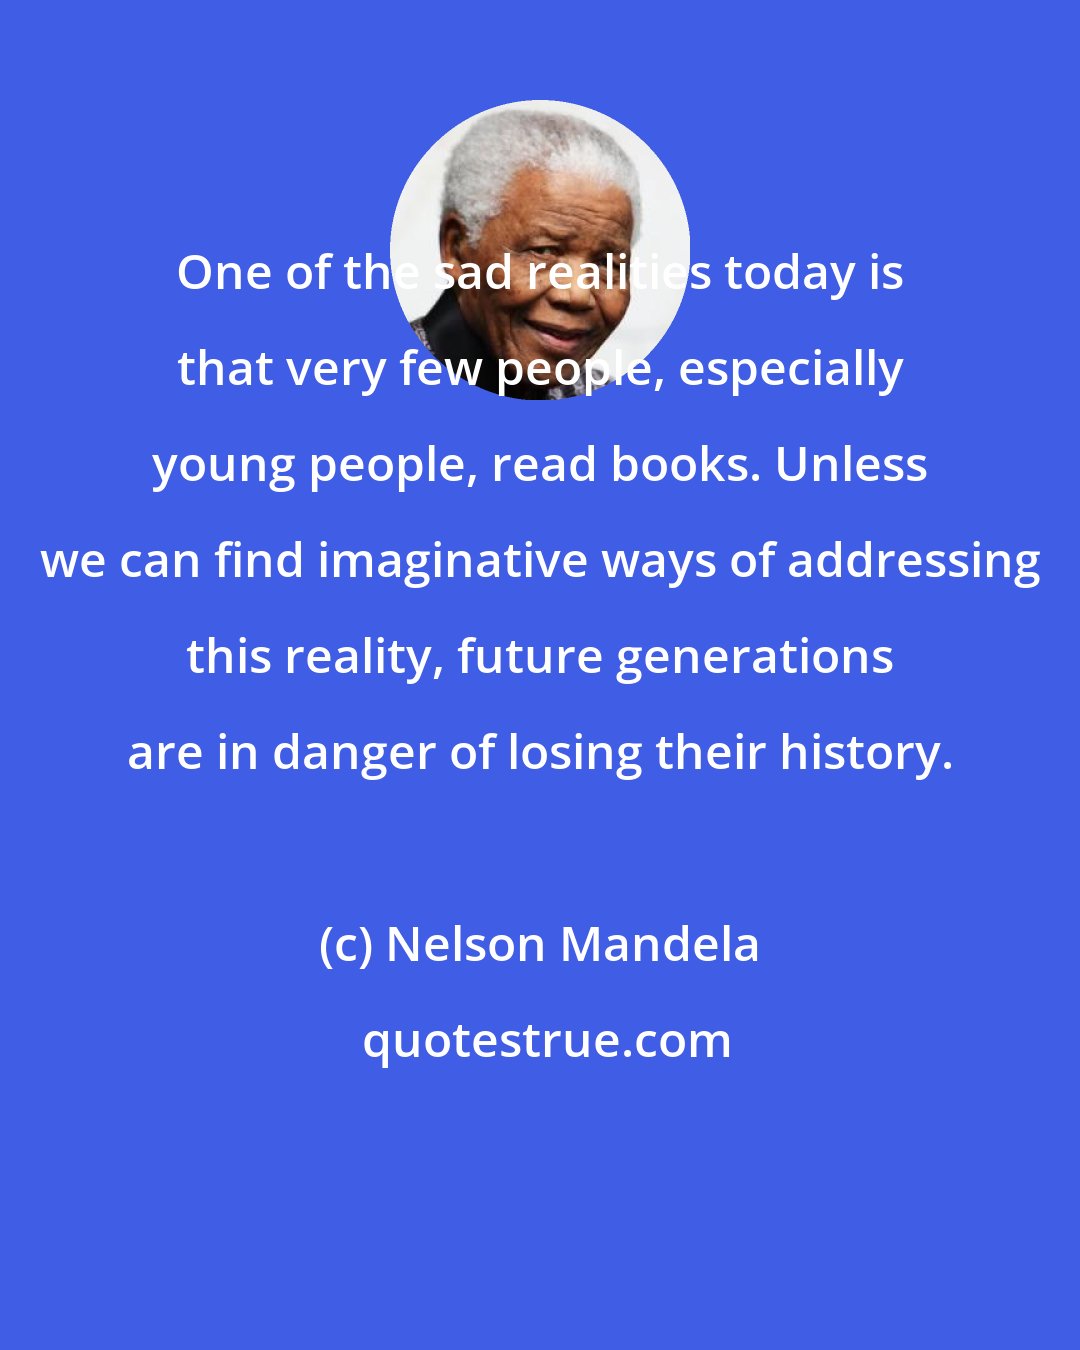 Nelson Mandela: One of the sad realities today is that very few people, especially young people, read books. Unless we can find imaginative ways of addressing this reality, future generations are in danger of losing their history.